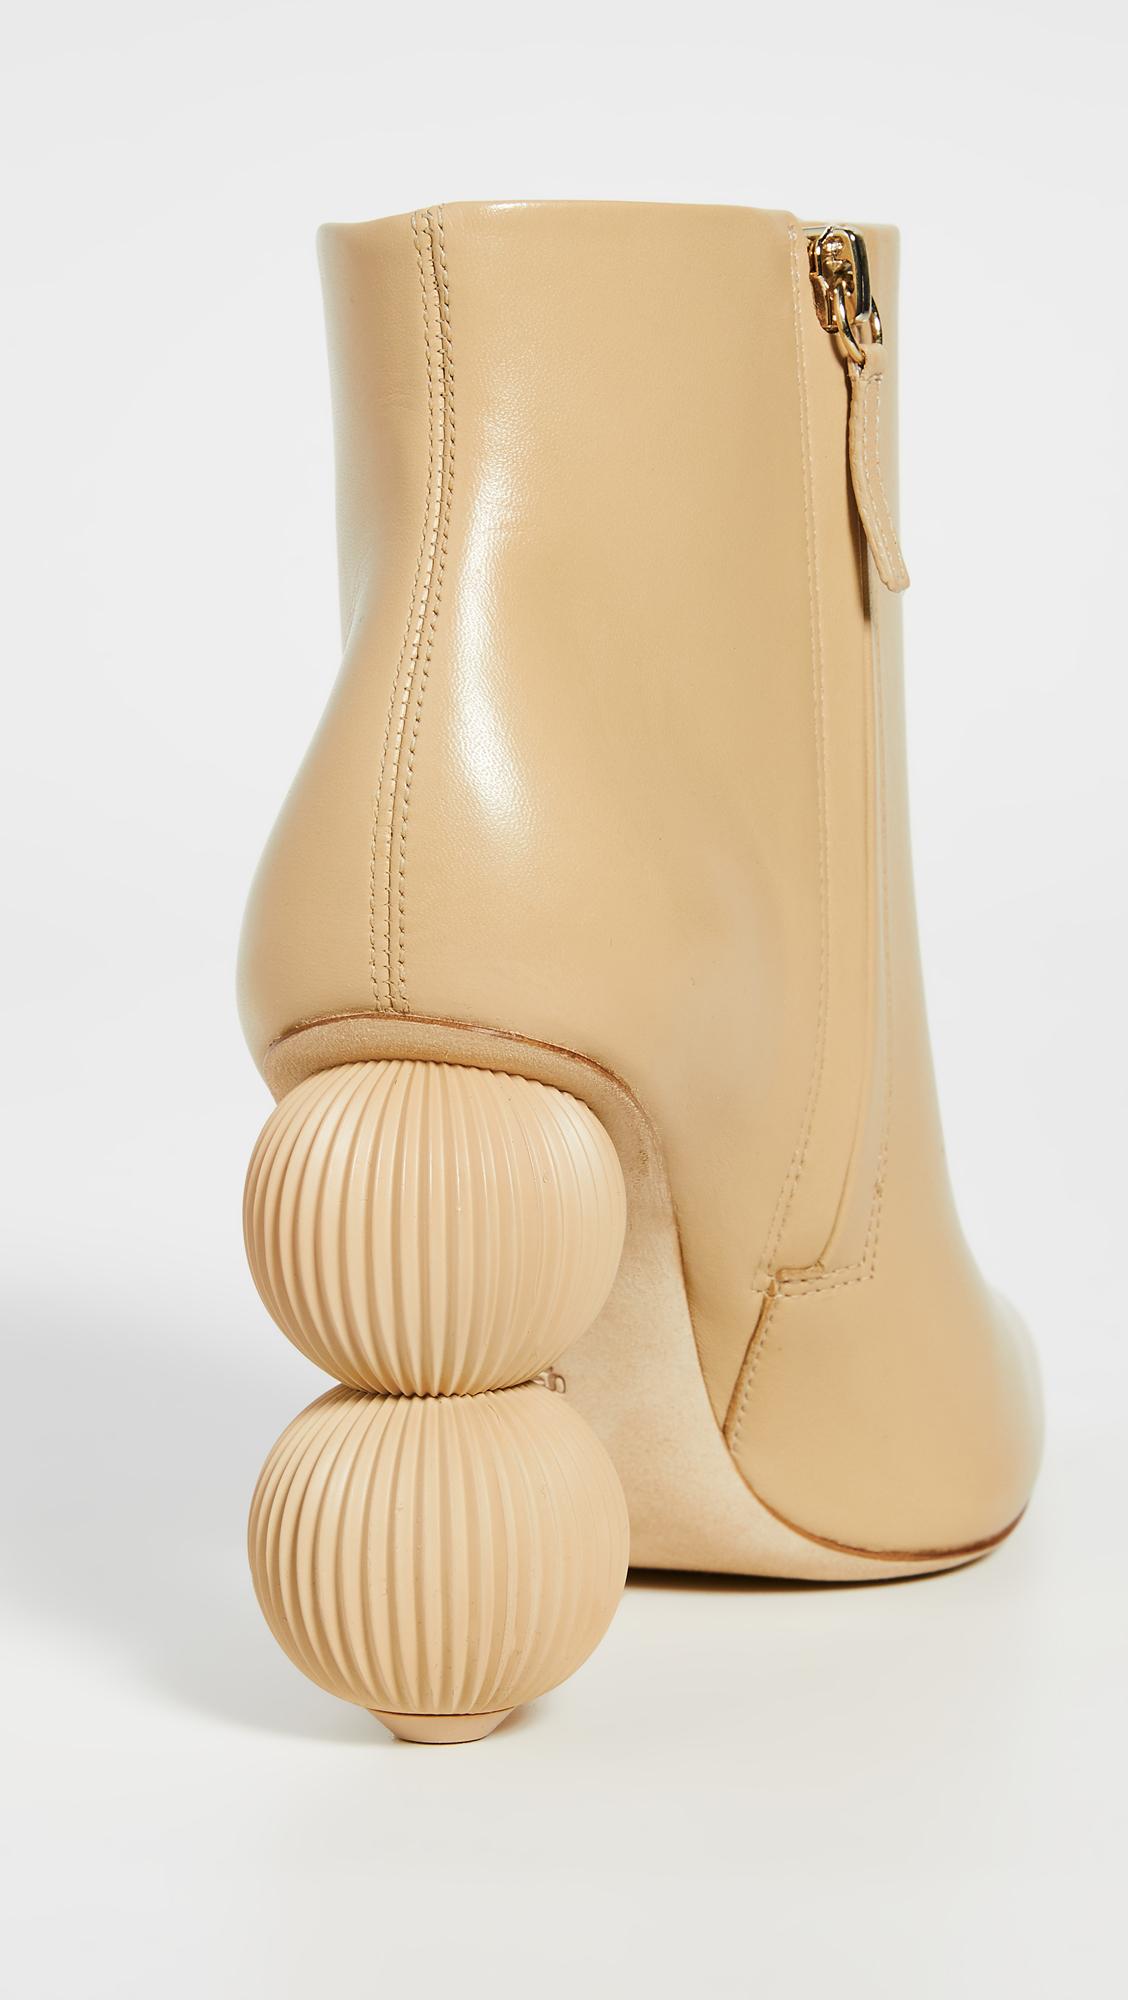 Cult Gaia Leather Cam Boots in Sand (Natural) Lyst